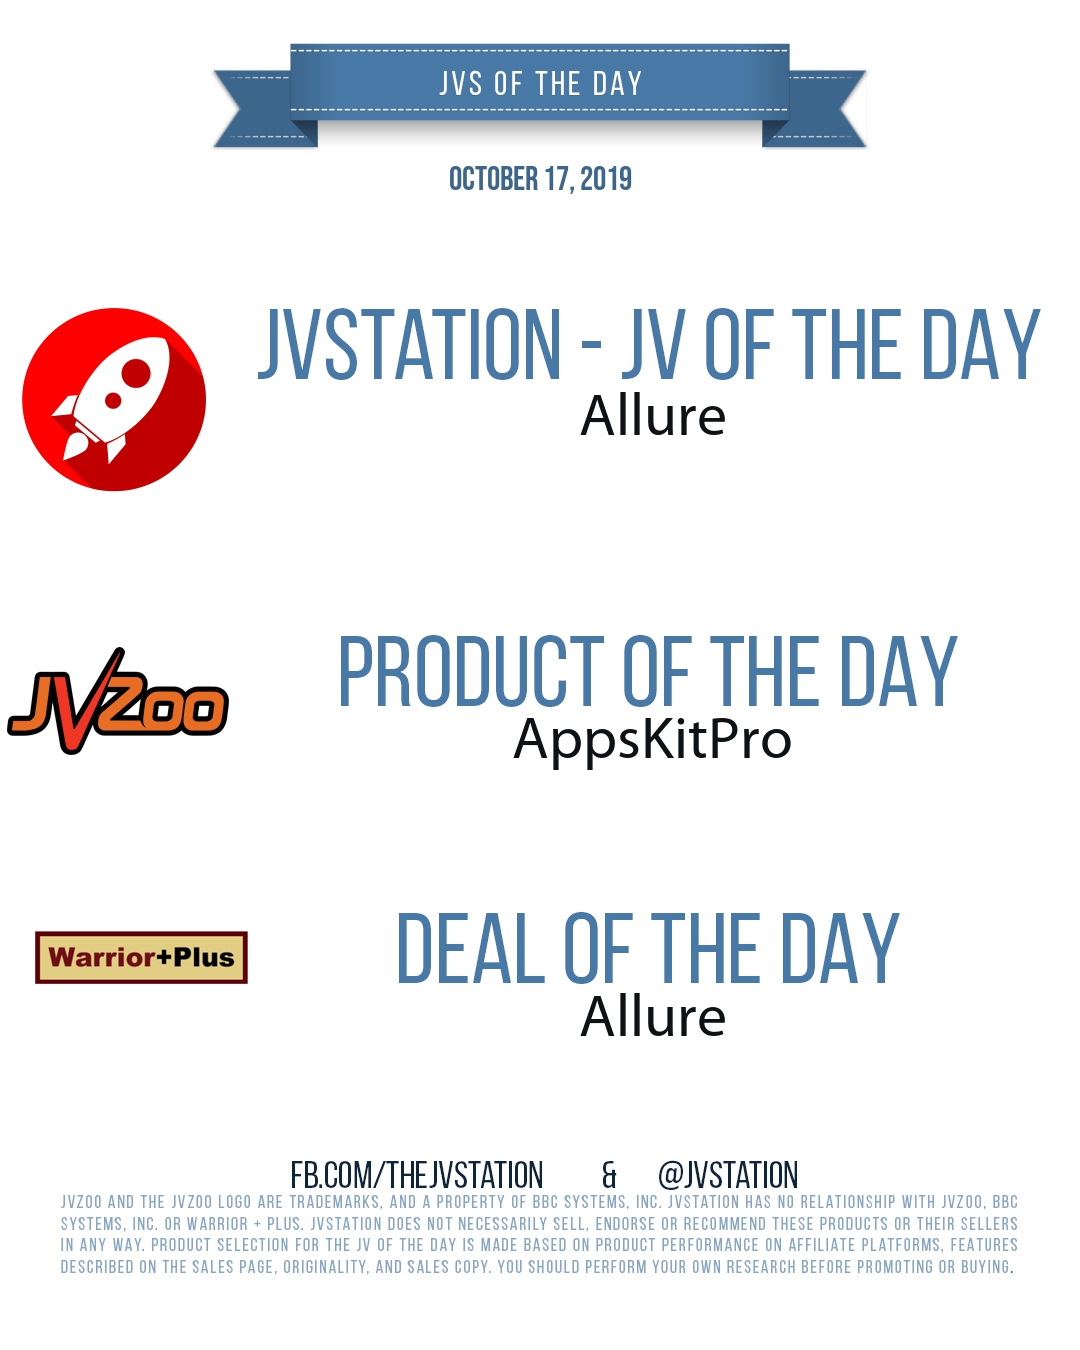 JVs of the day - October 17, 2019